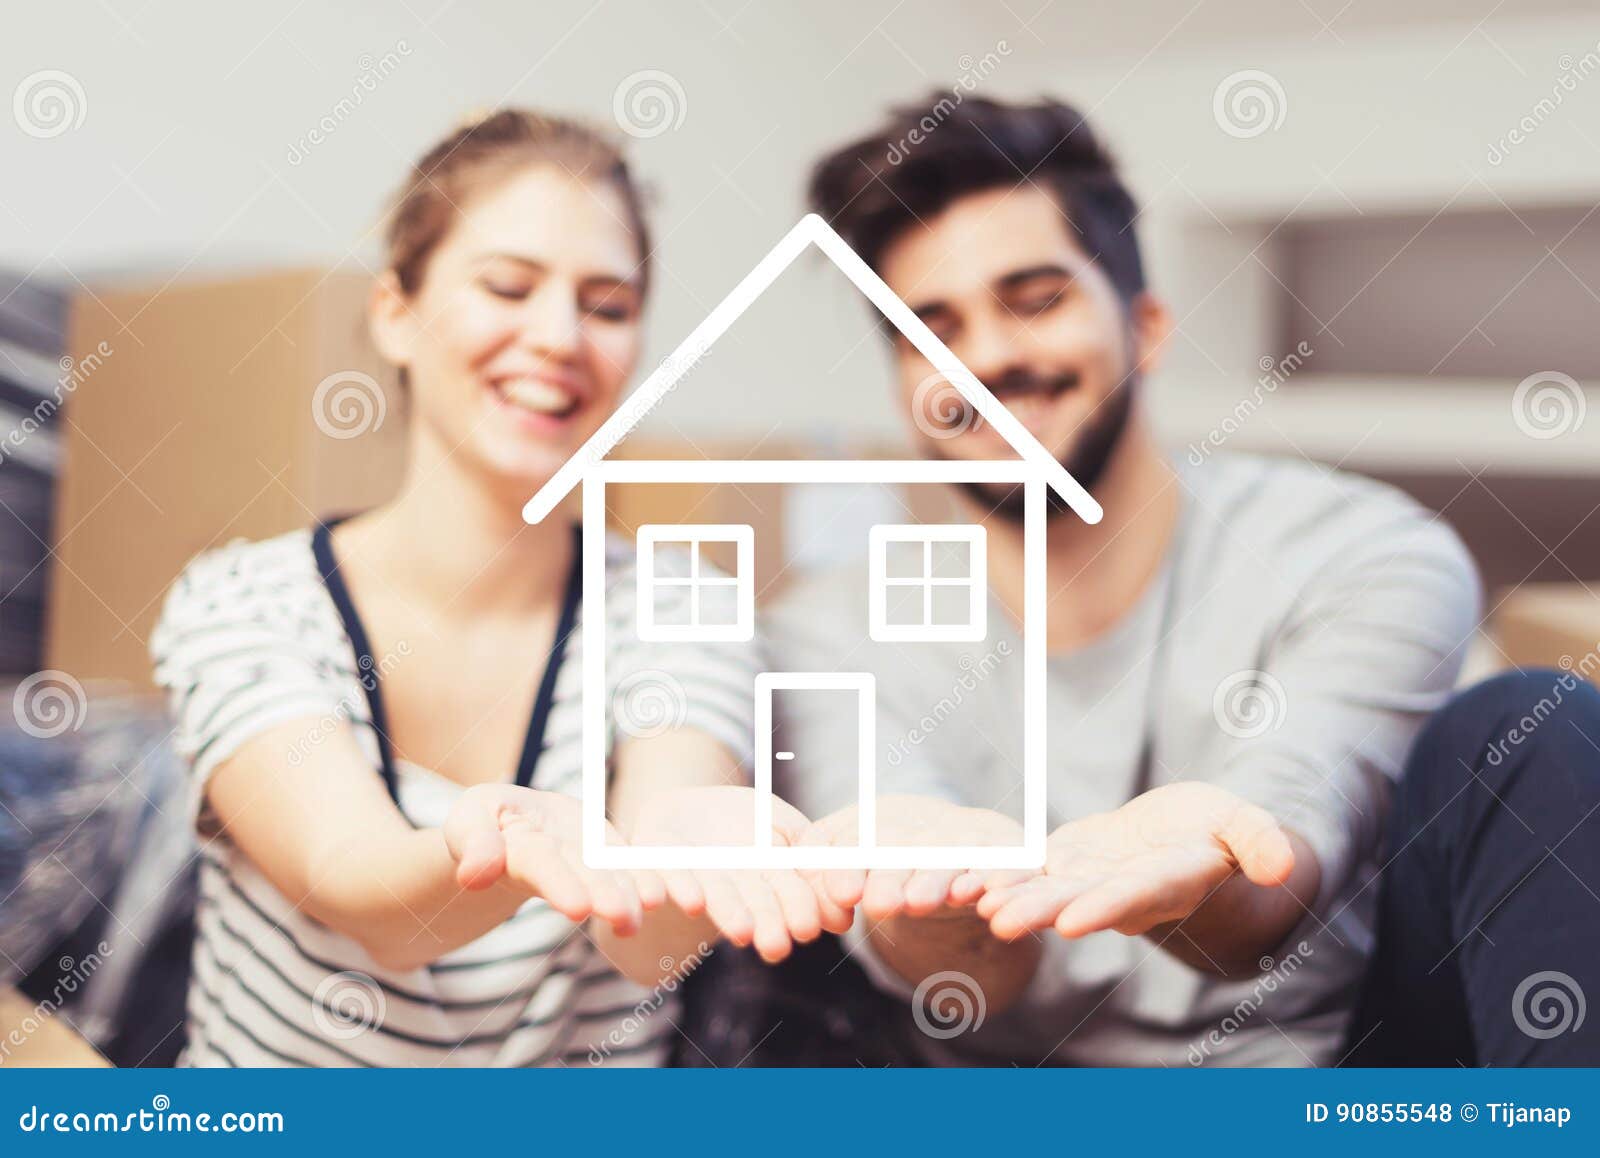 young couple holding their new, dream home in hands